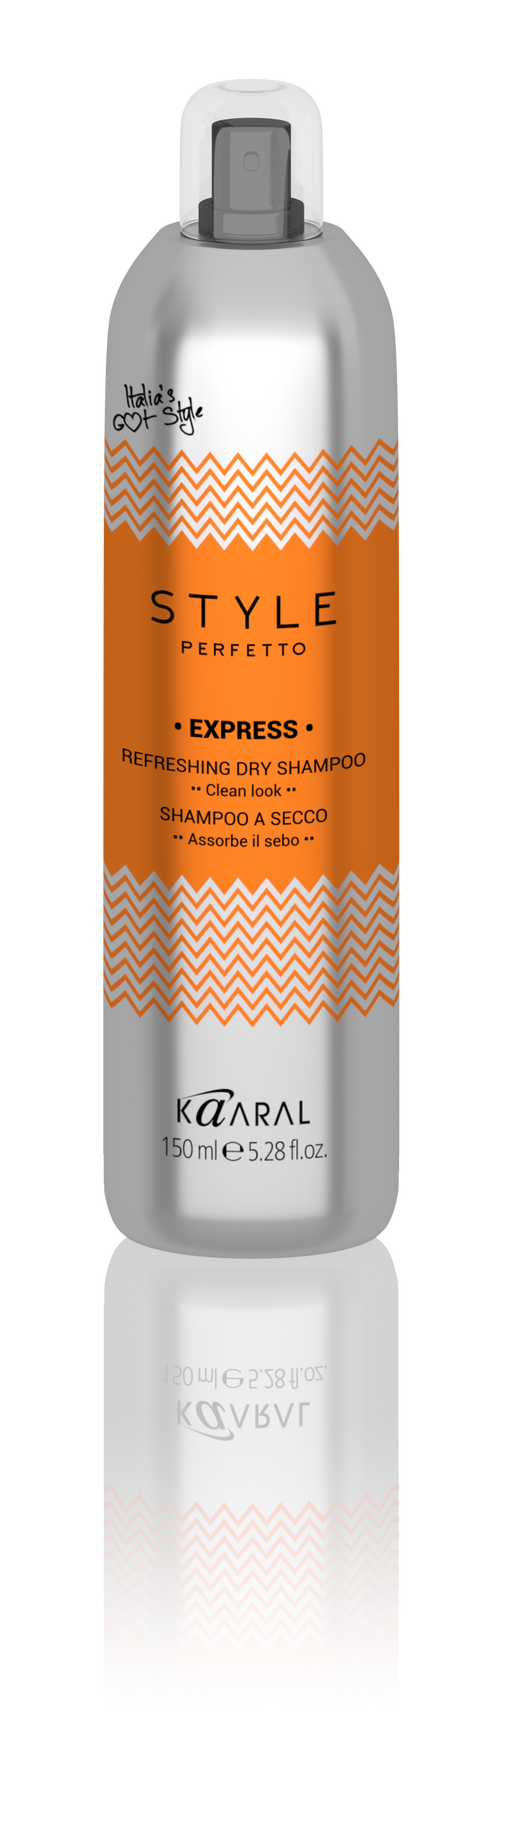 Kaaral Style Perfetto Express Dry Shampoo - Clearance!